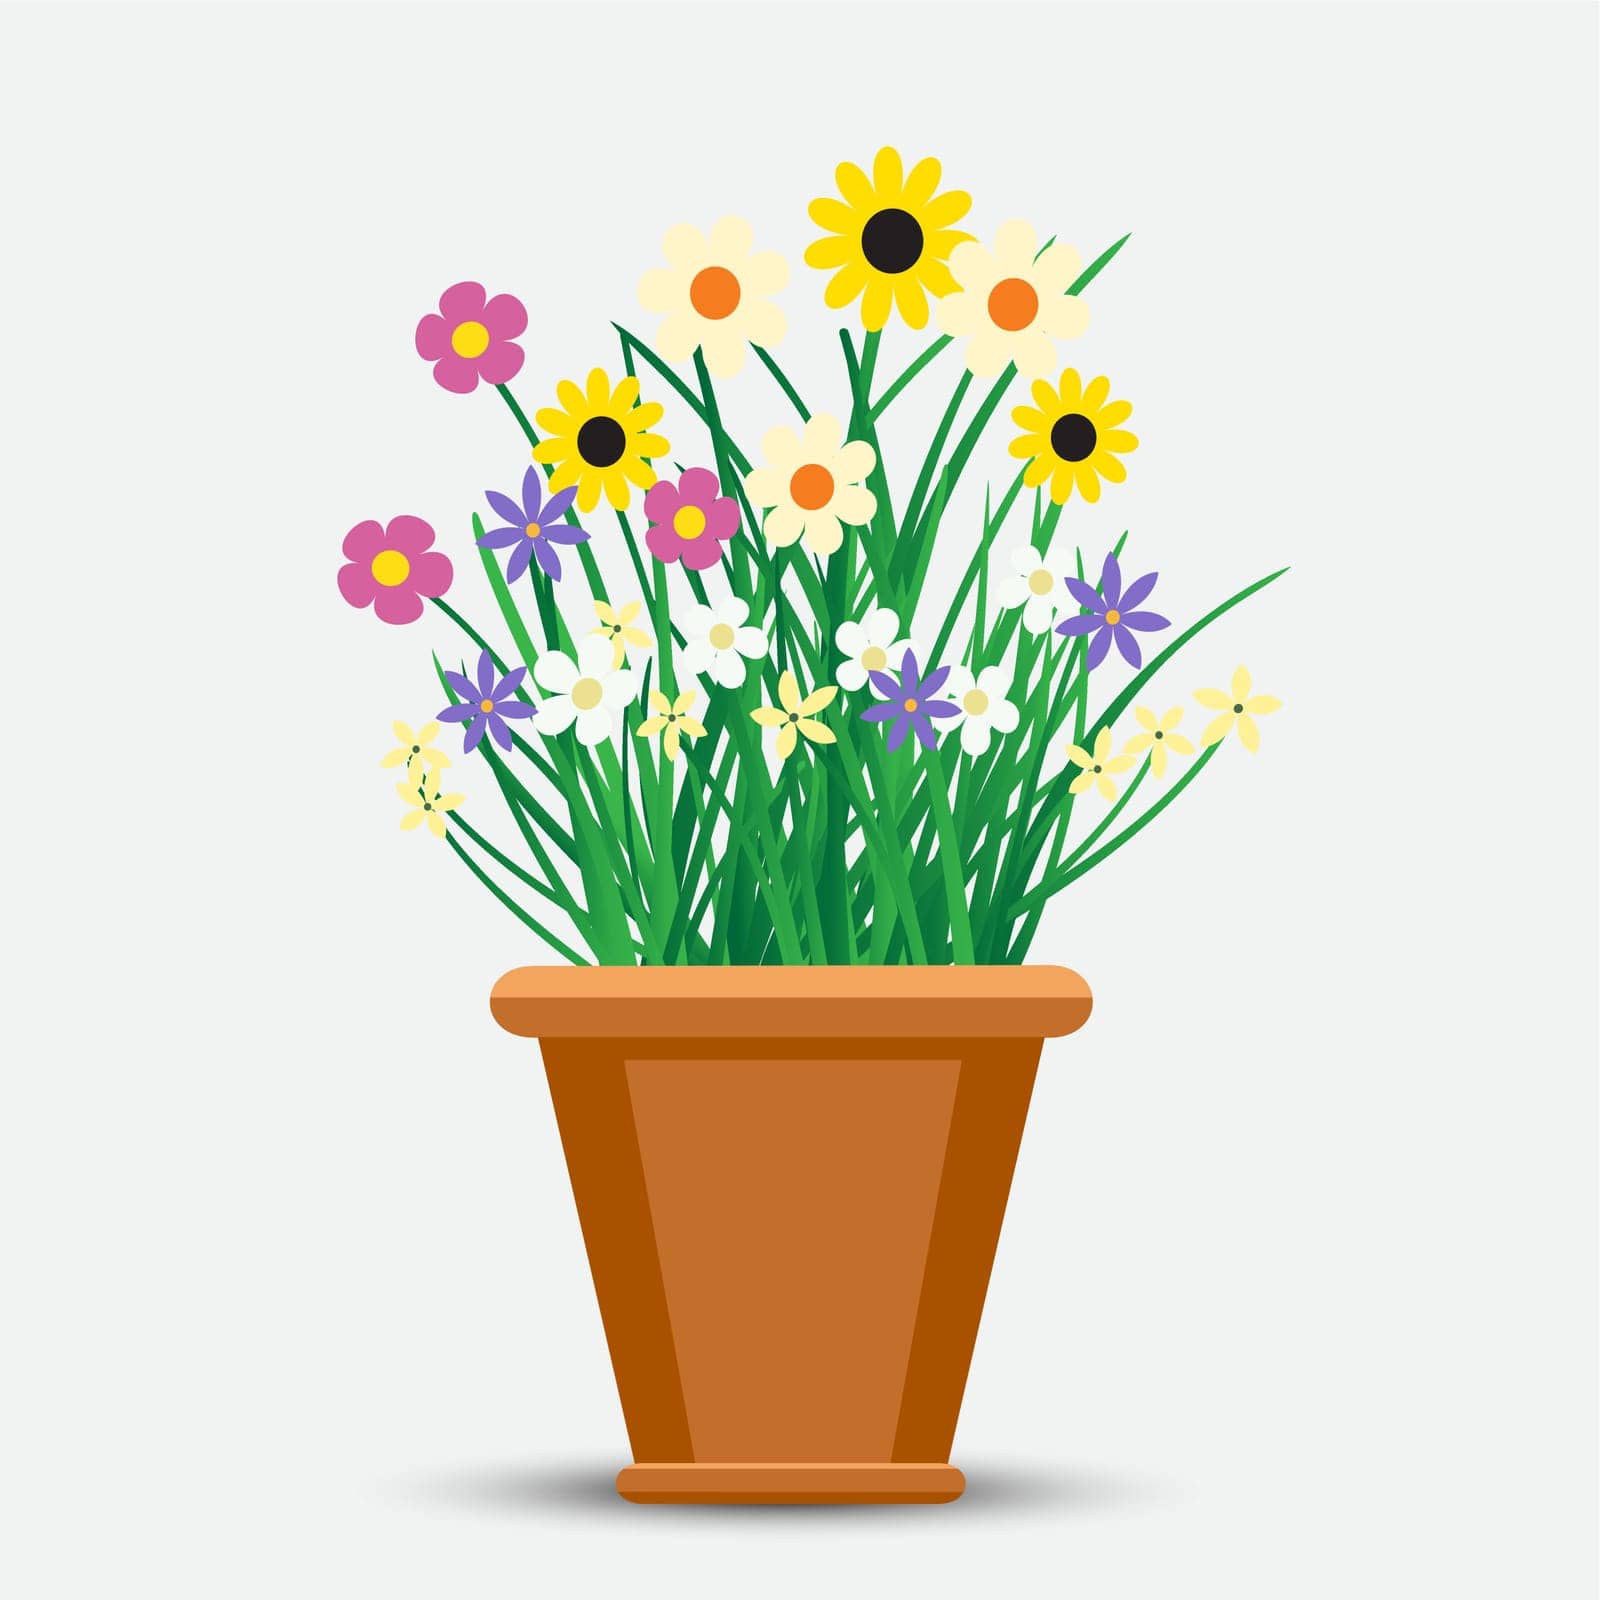 Flowers grows in flowerpot with shadow on light background. Houseplant decorative flower grow